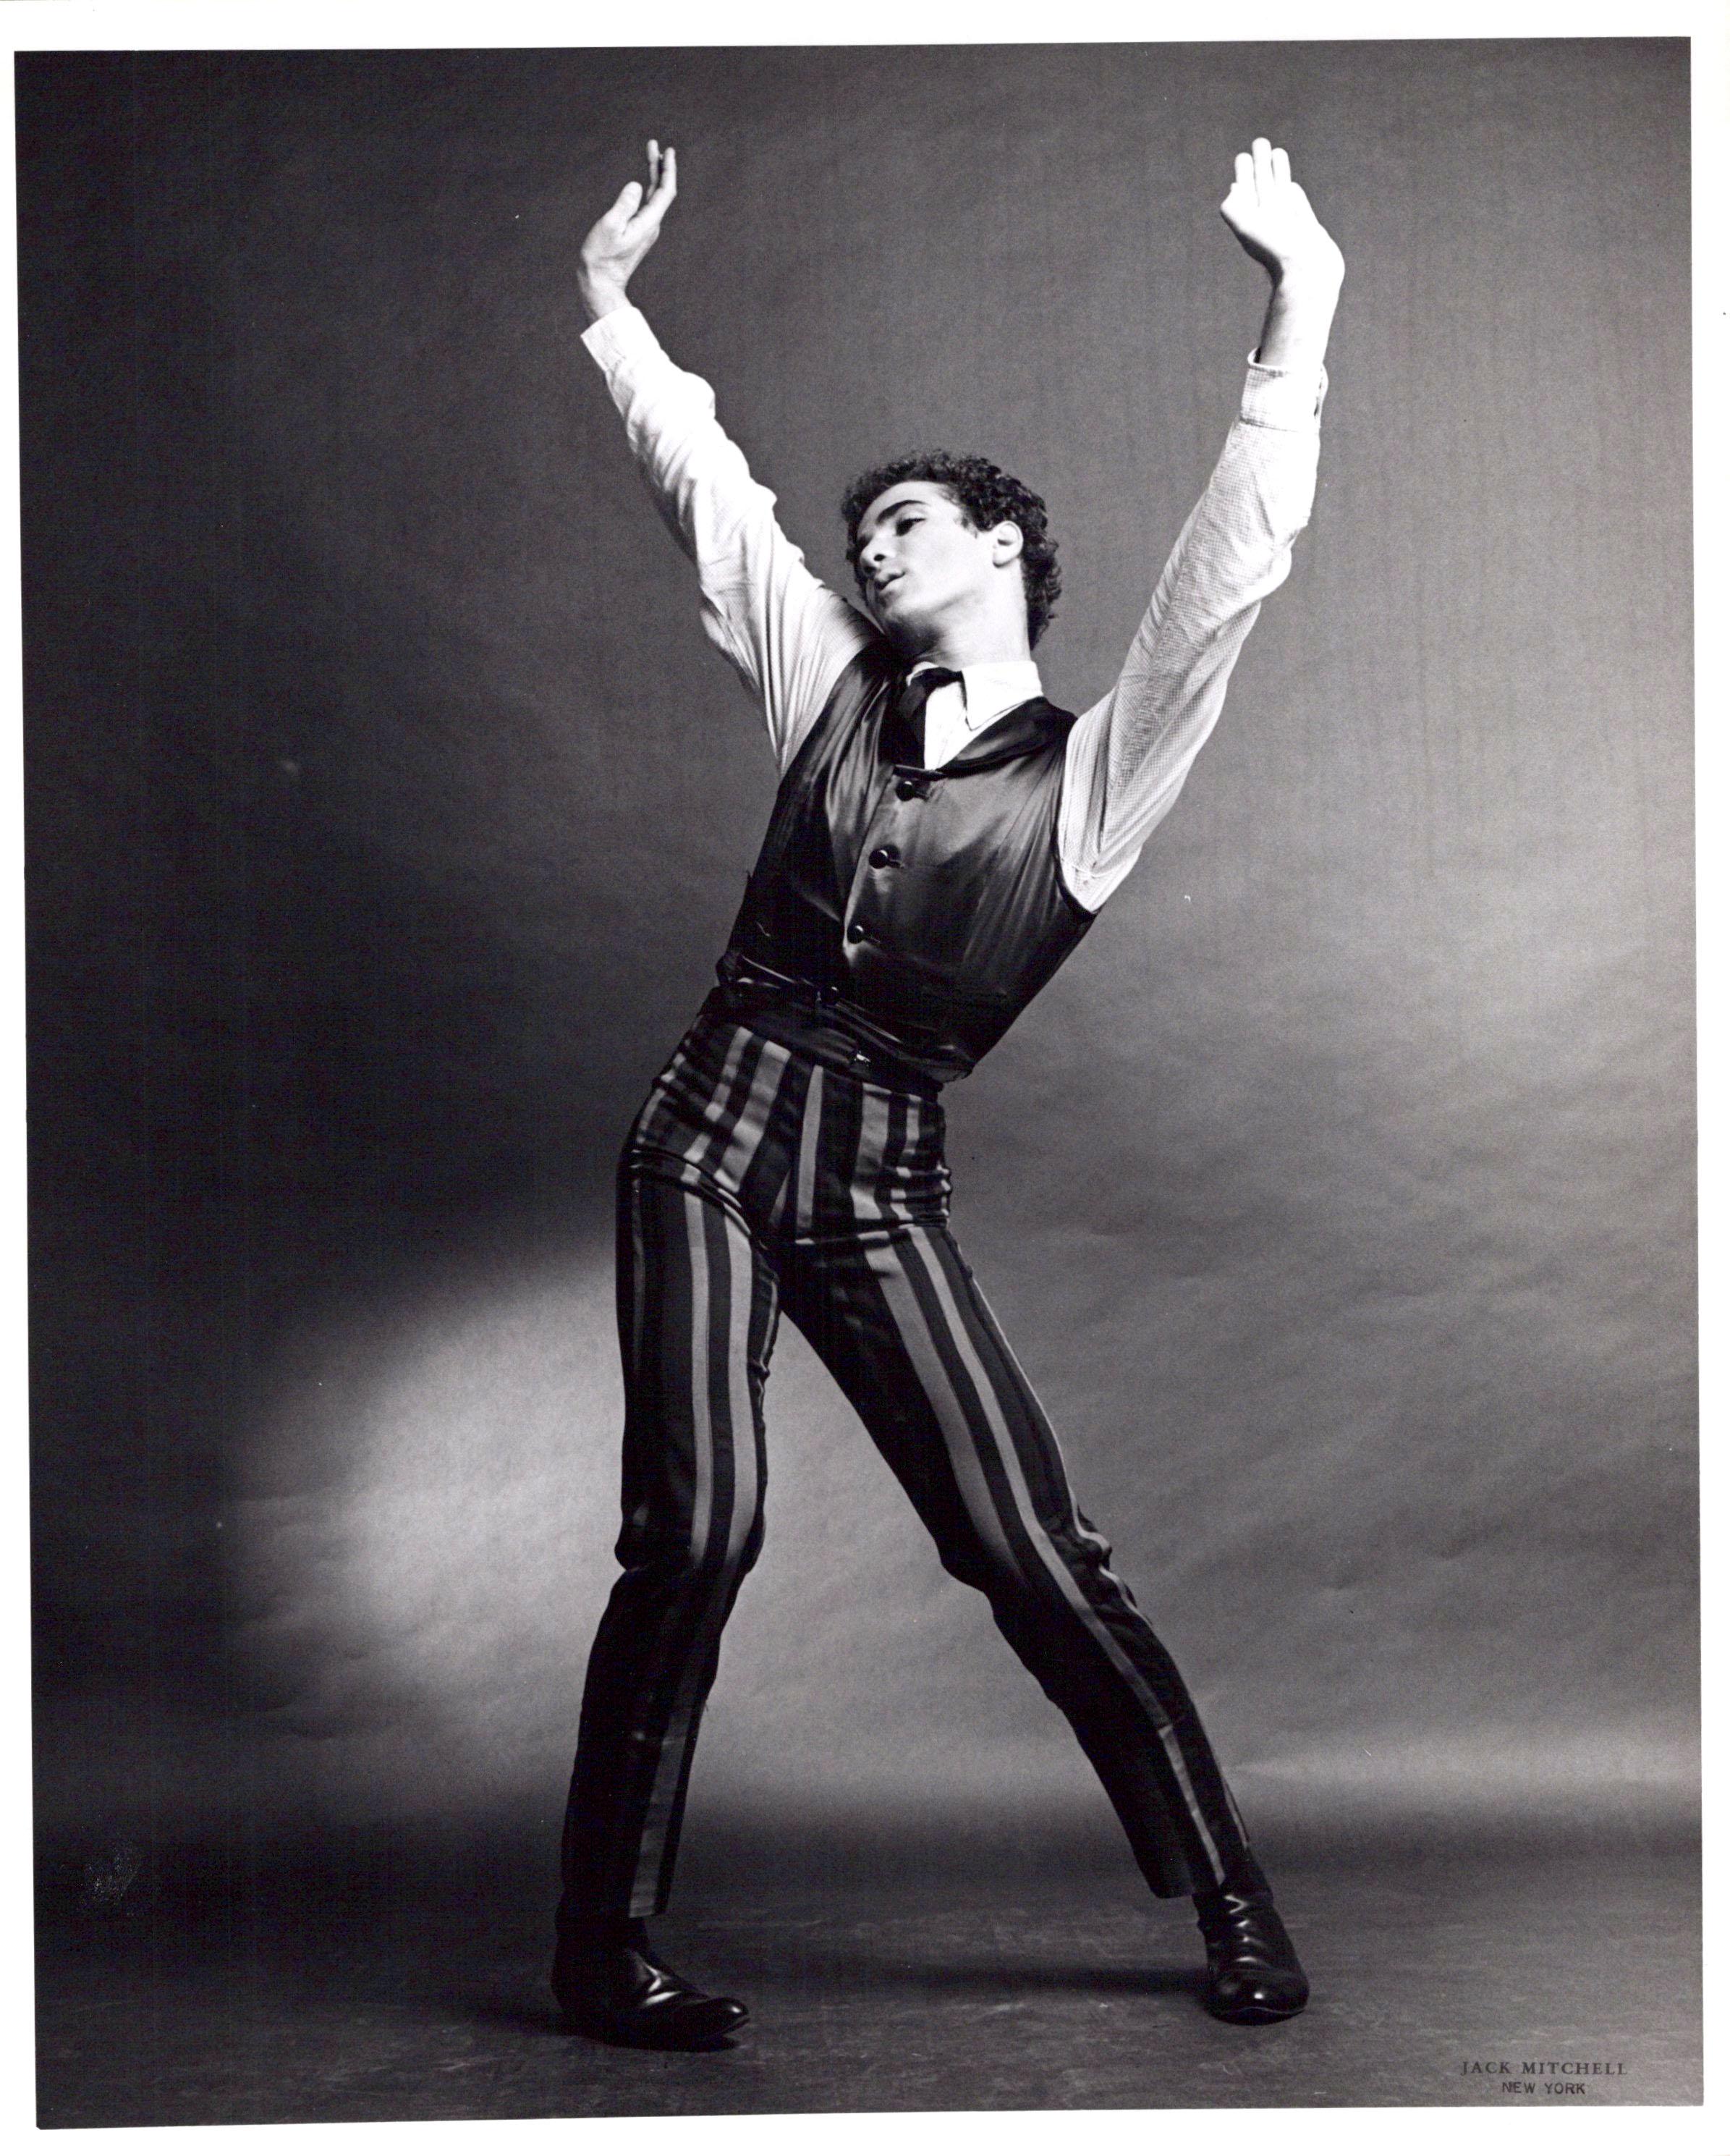 Jack Mitchell Black and White Photograph – Dance Dancer & Choreographer Louis Falco performing